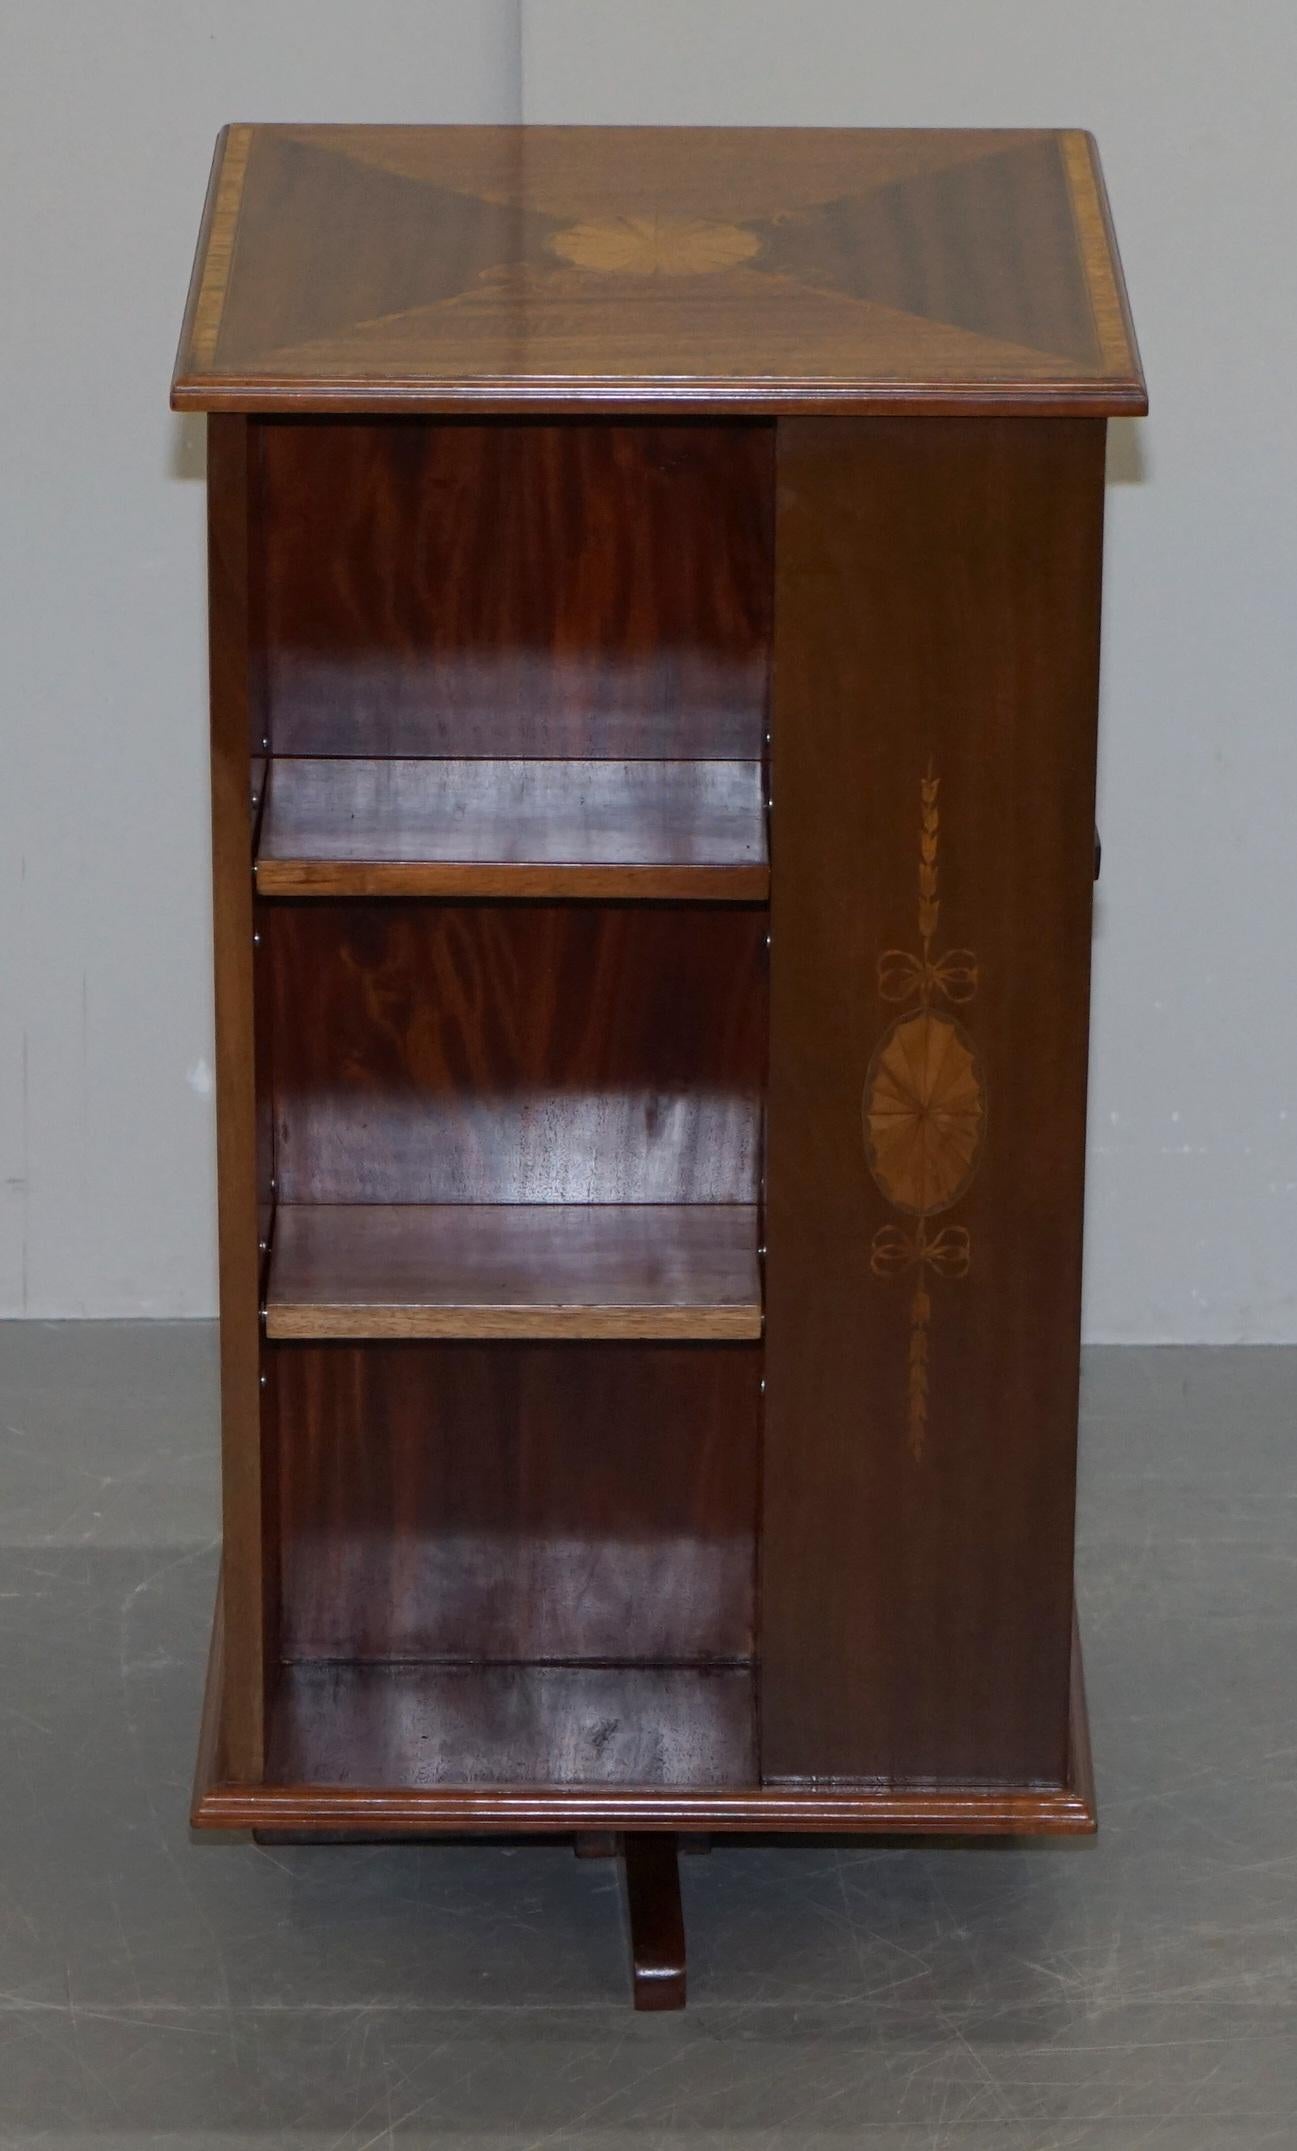 We are delighted to offer for sale this stunning circa 1900 burr walnut and mahogany revolving bookcase with Sheraton inlay to the top

An exceptionally well made and highly decorative library bookcase. This is a very versatile piece of furniture